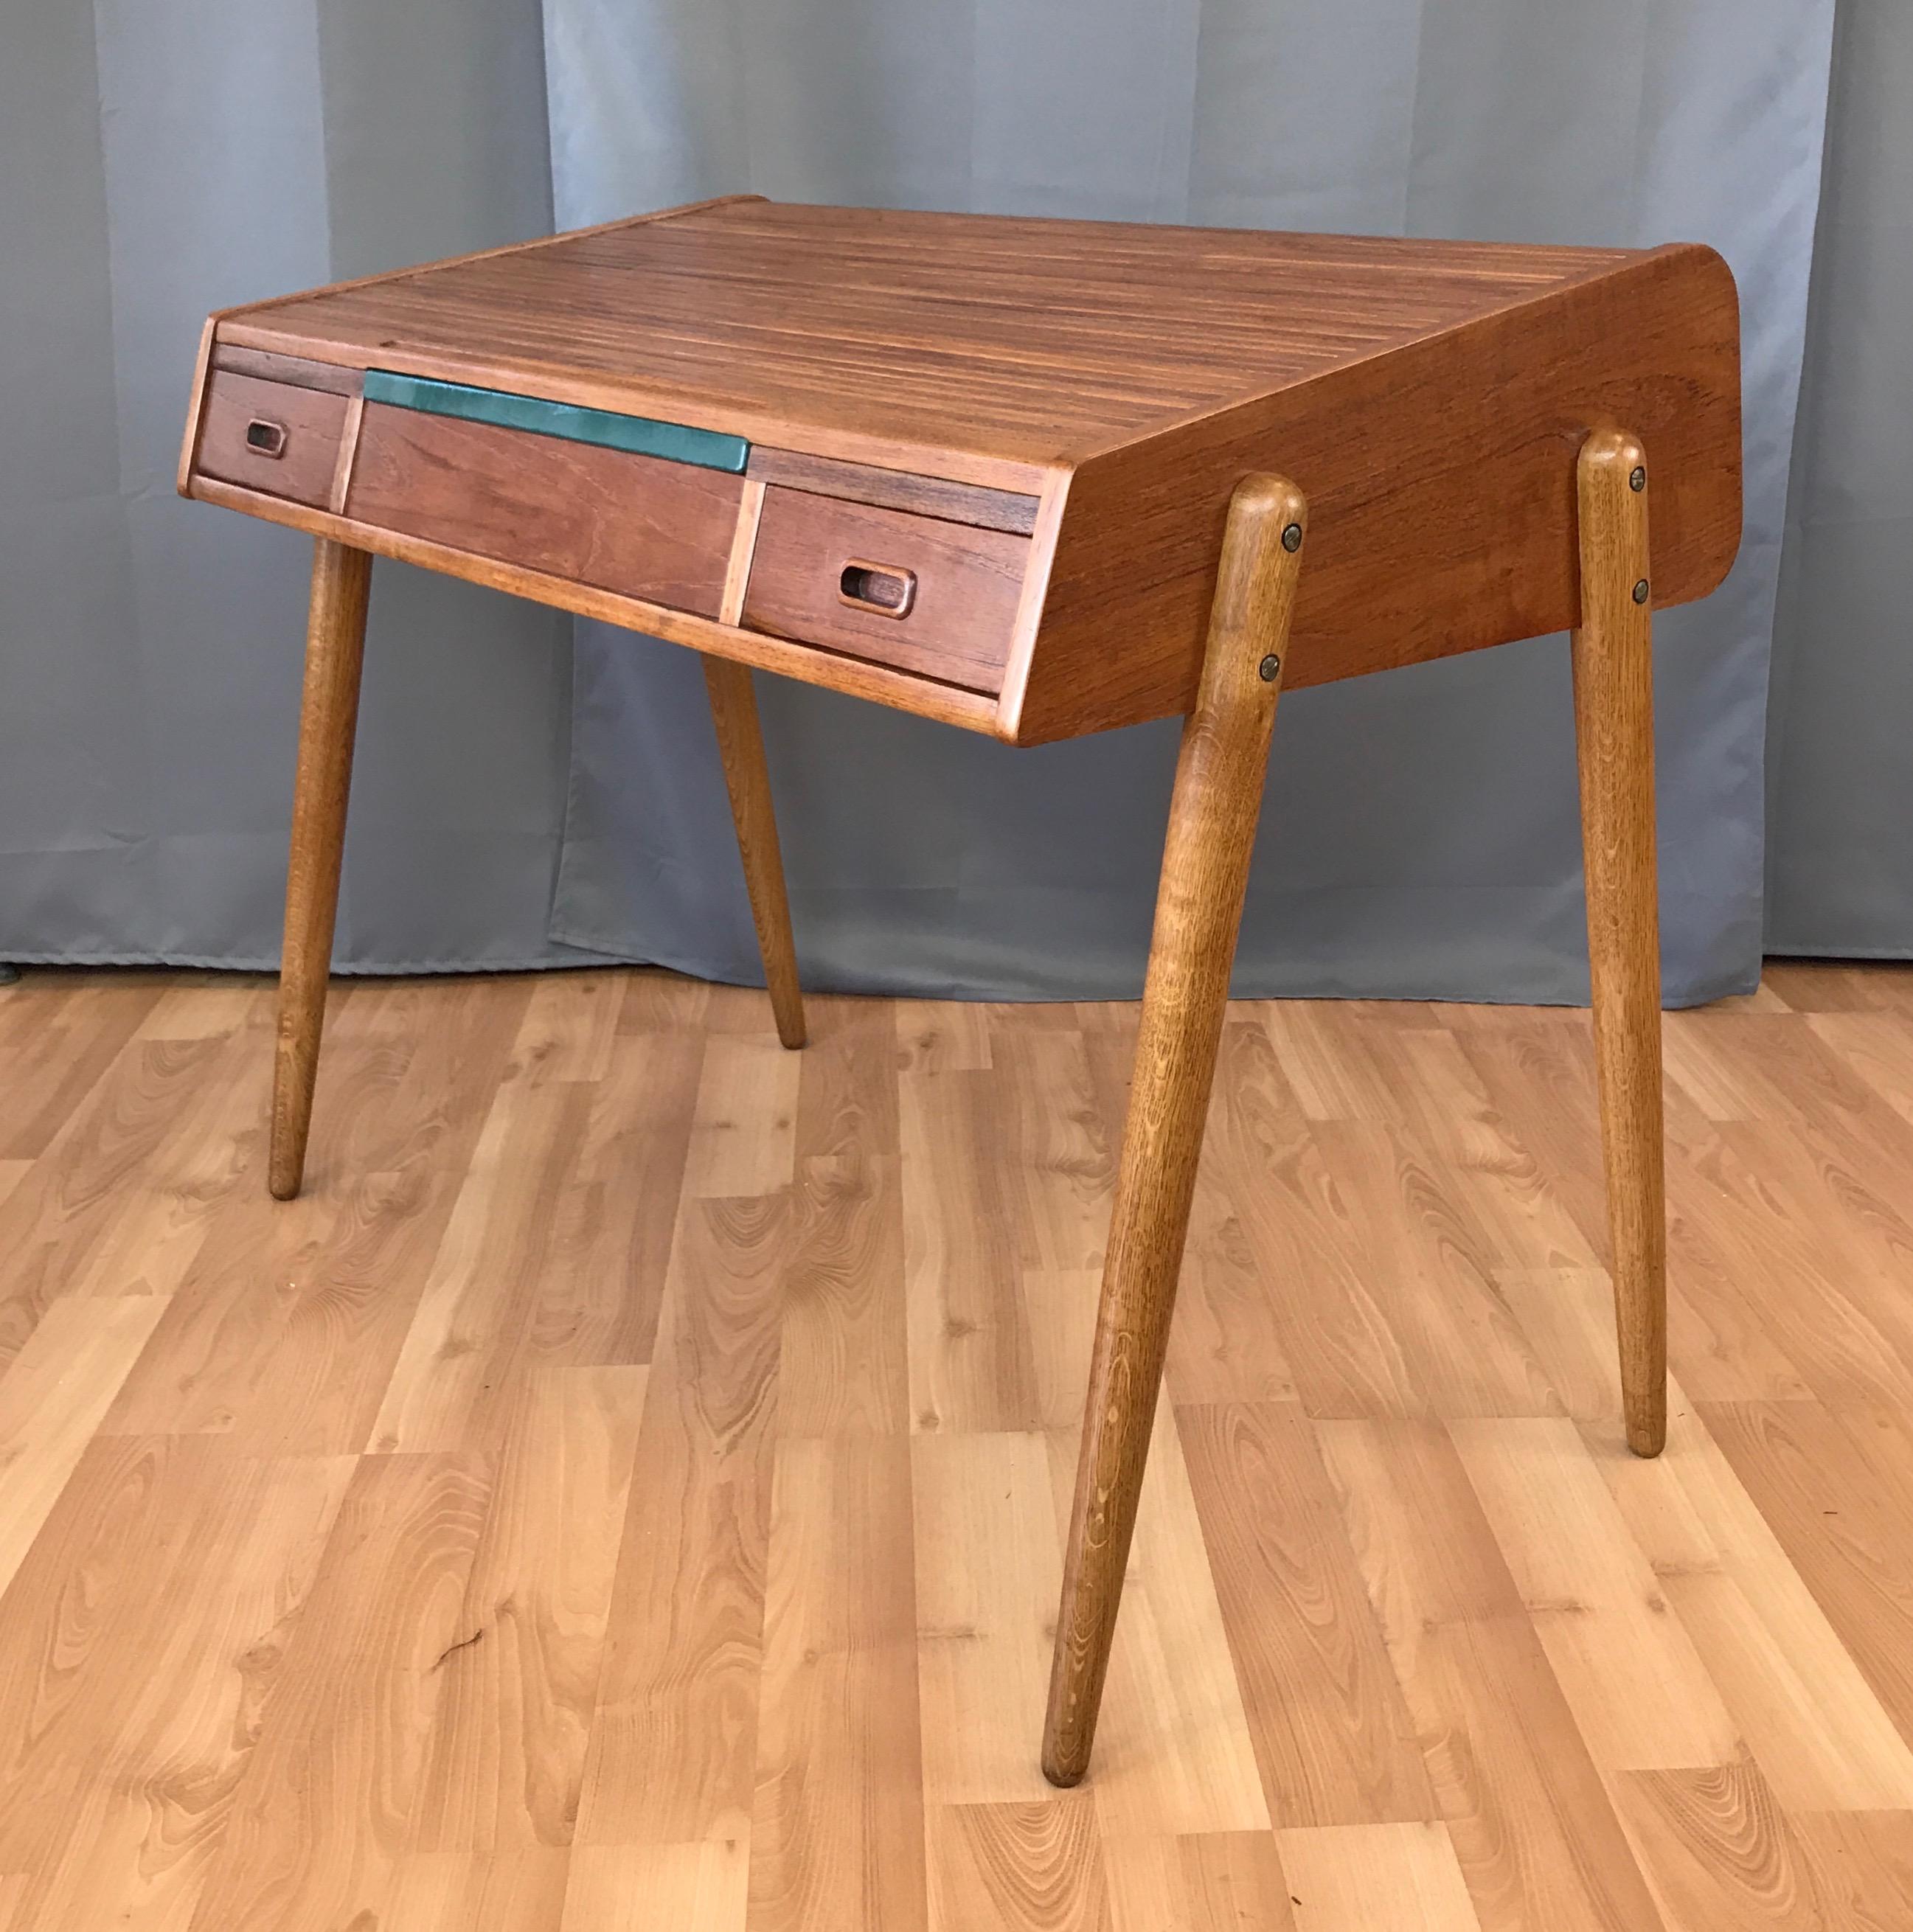 A rare Scandinavian Modern teak and oak roll top desk with solid core pine construction by Arne Hovmand-Olsen for Mogens Kold Møbelfabrik.

Sleek teak cabinet with great lines on tapered oak legs that give it a spry, light on its feet appearance.